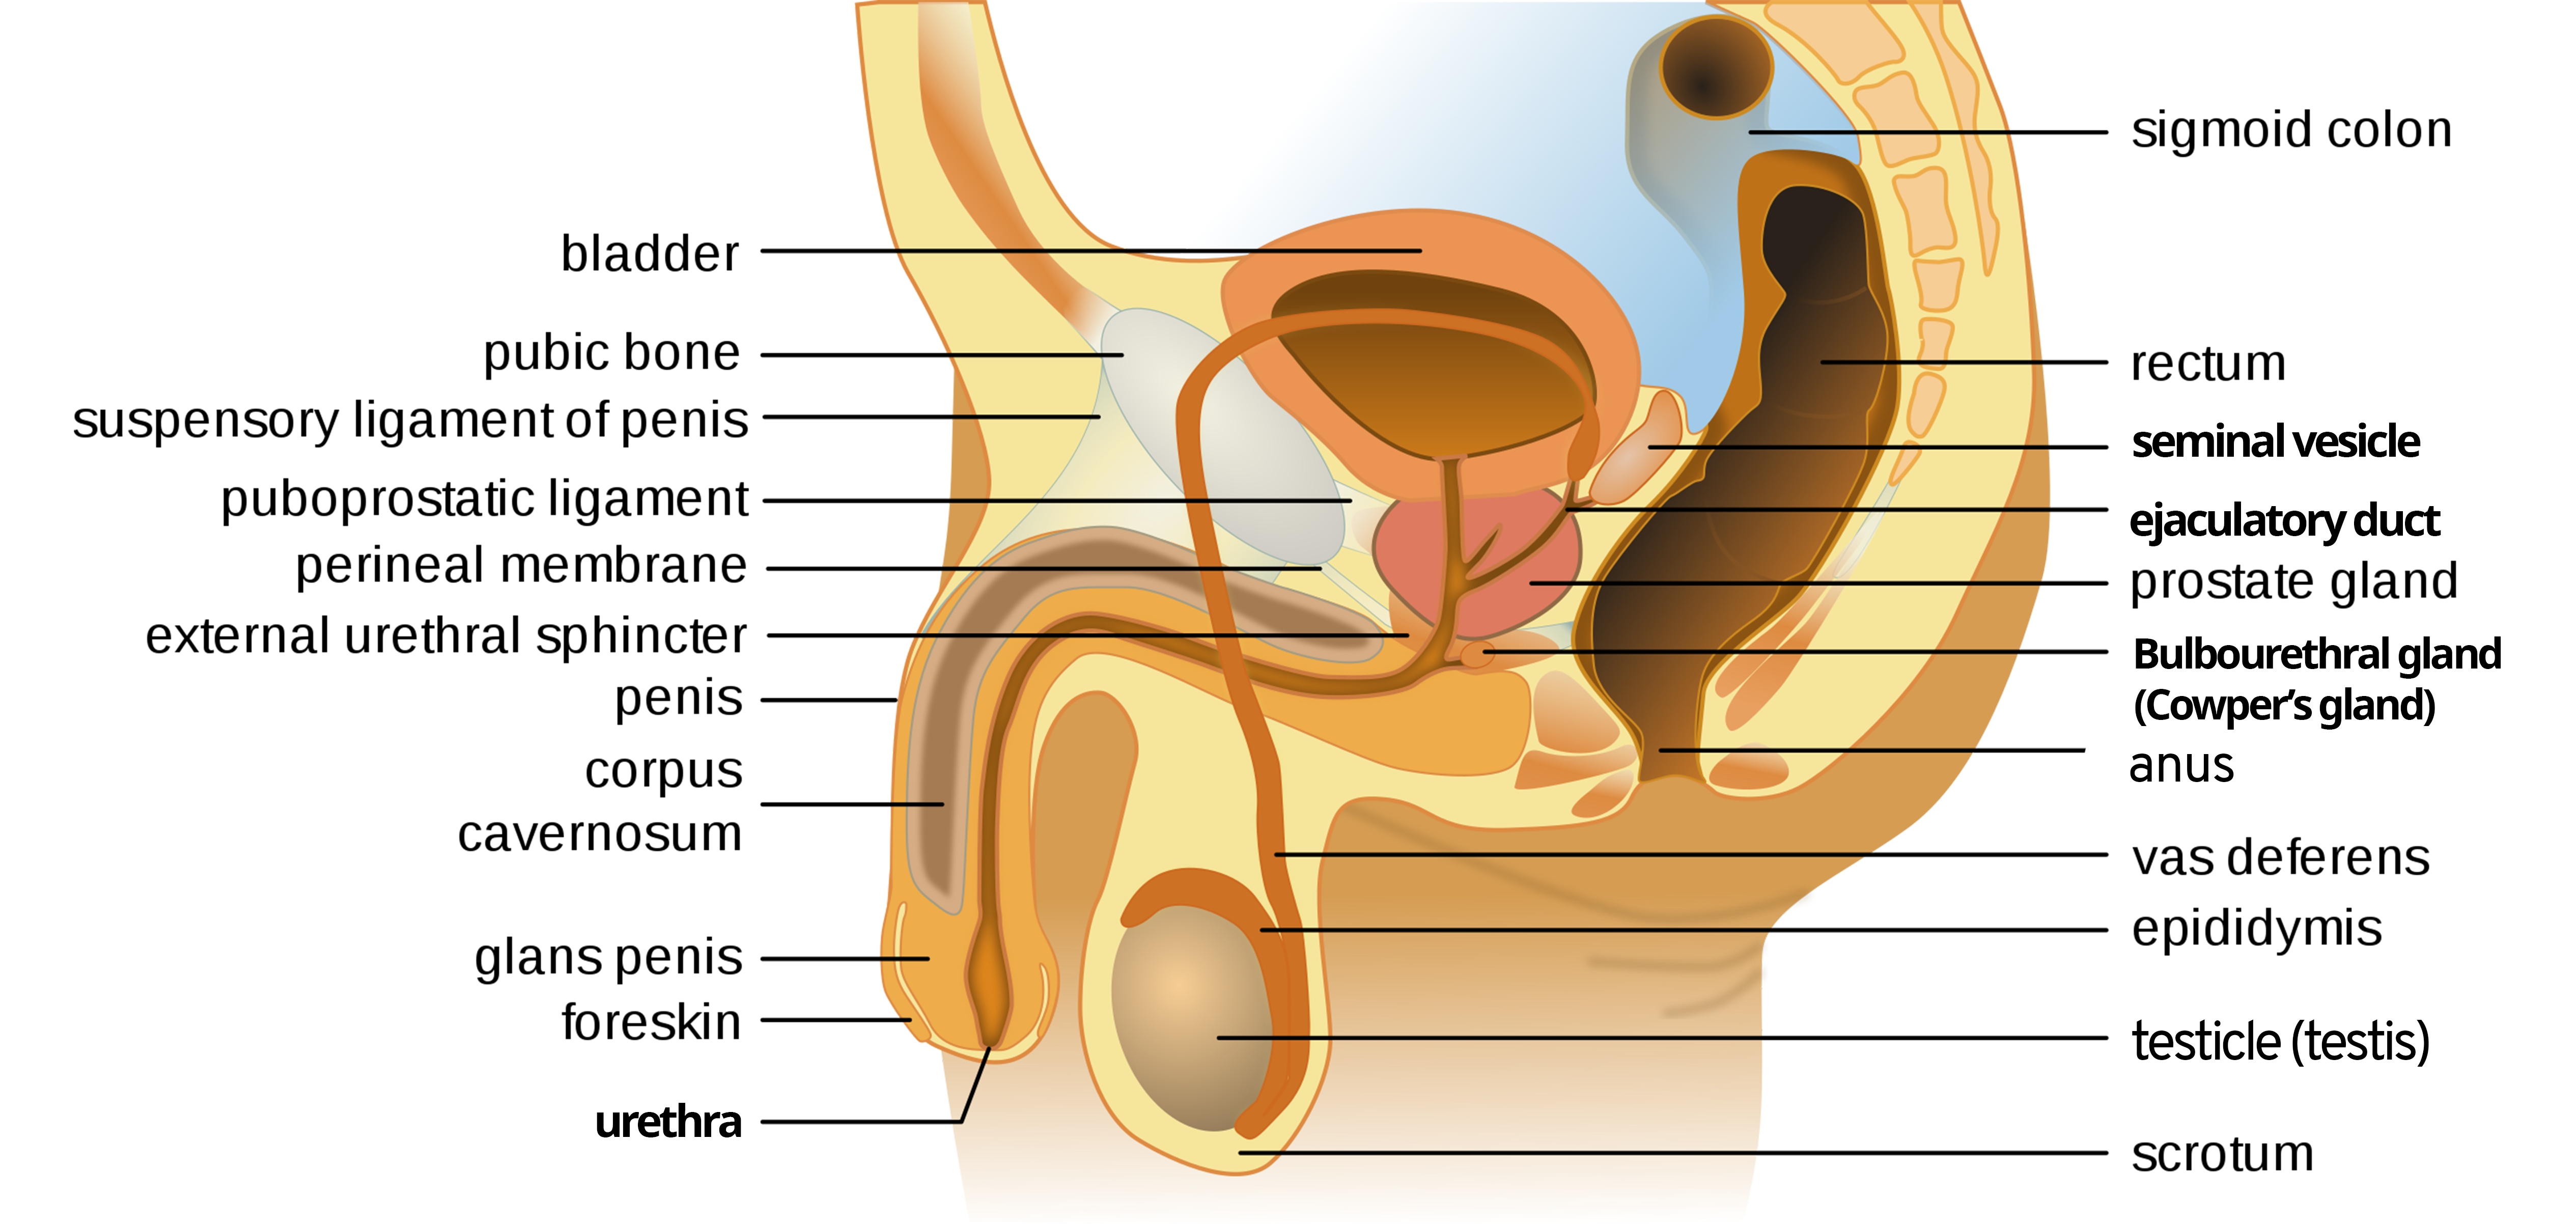 Labeled figure of male reproductive system with chapter-relevant pieces in bold.